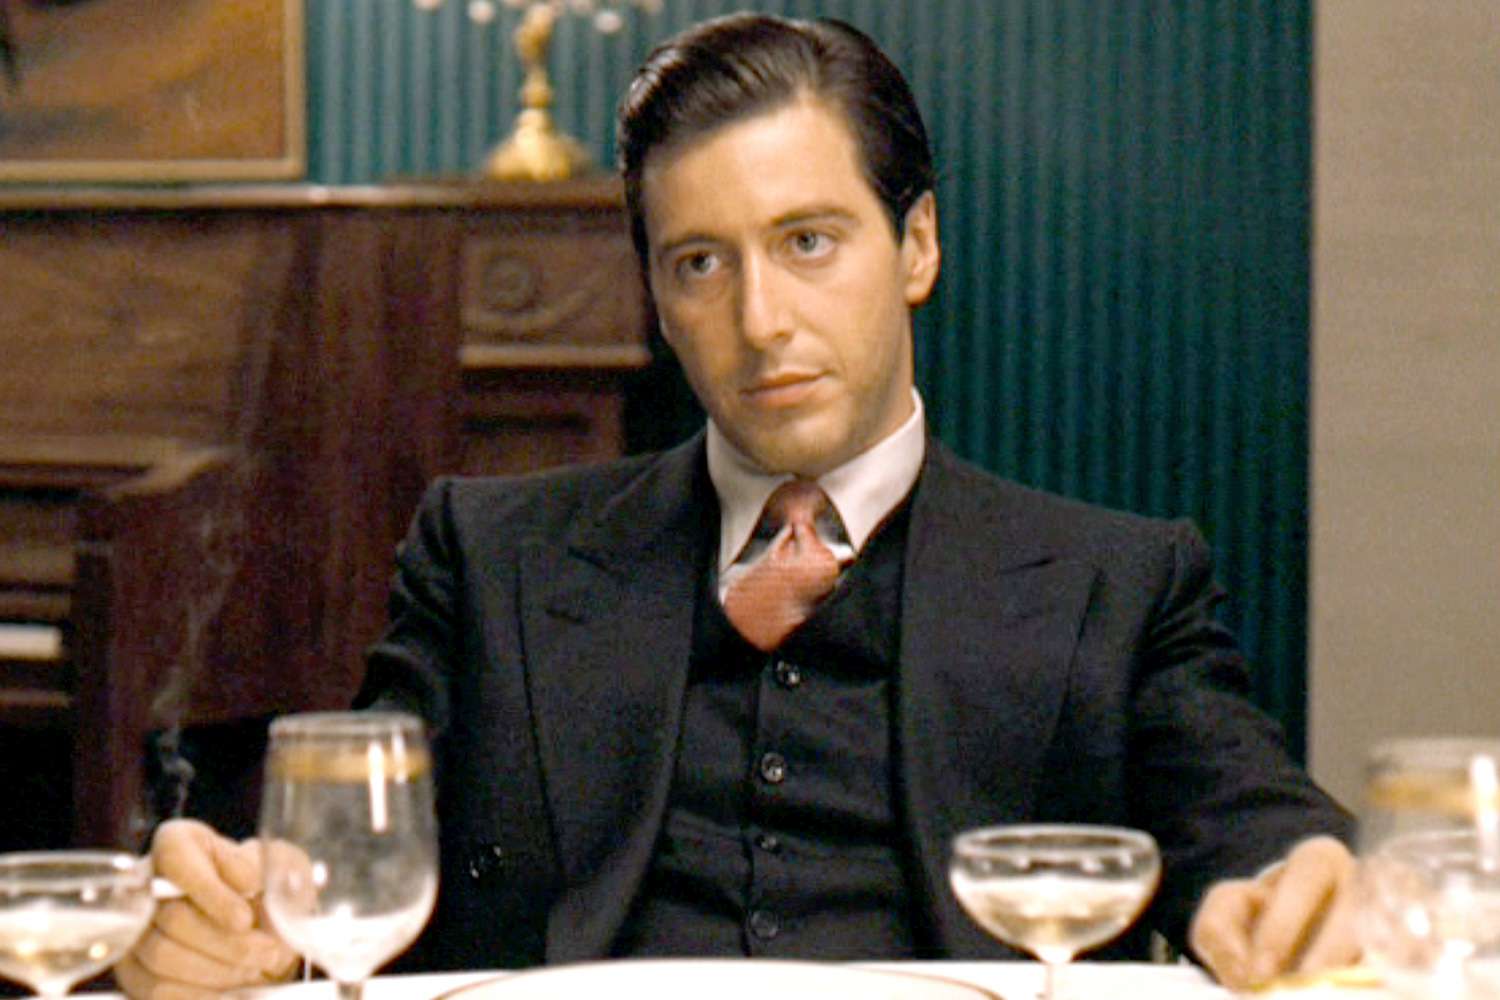 Young Al Pacino wearing a black suit